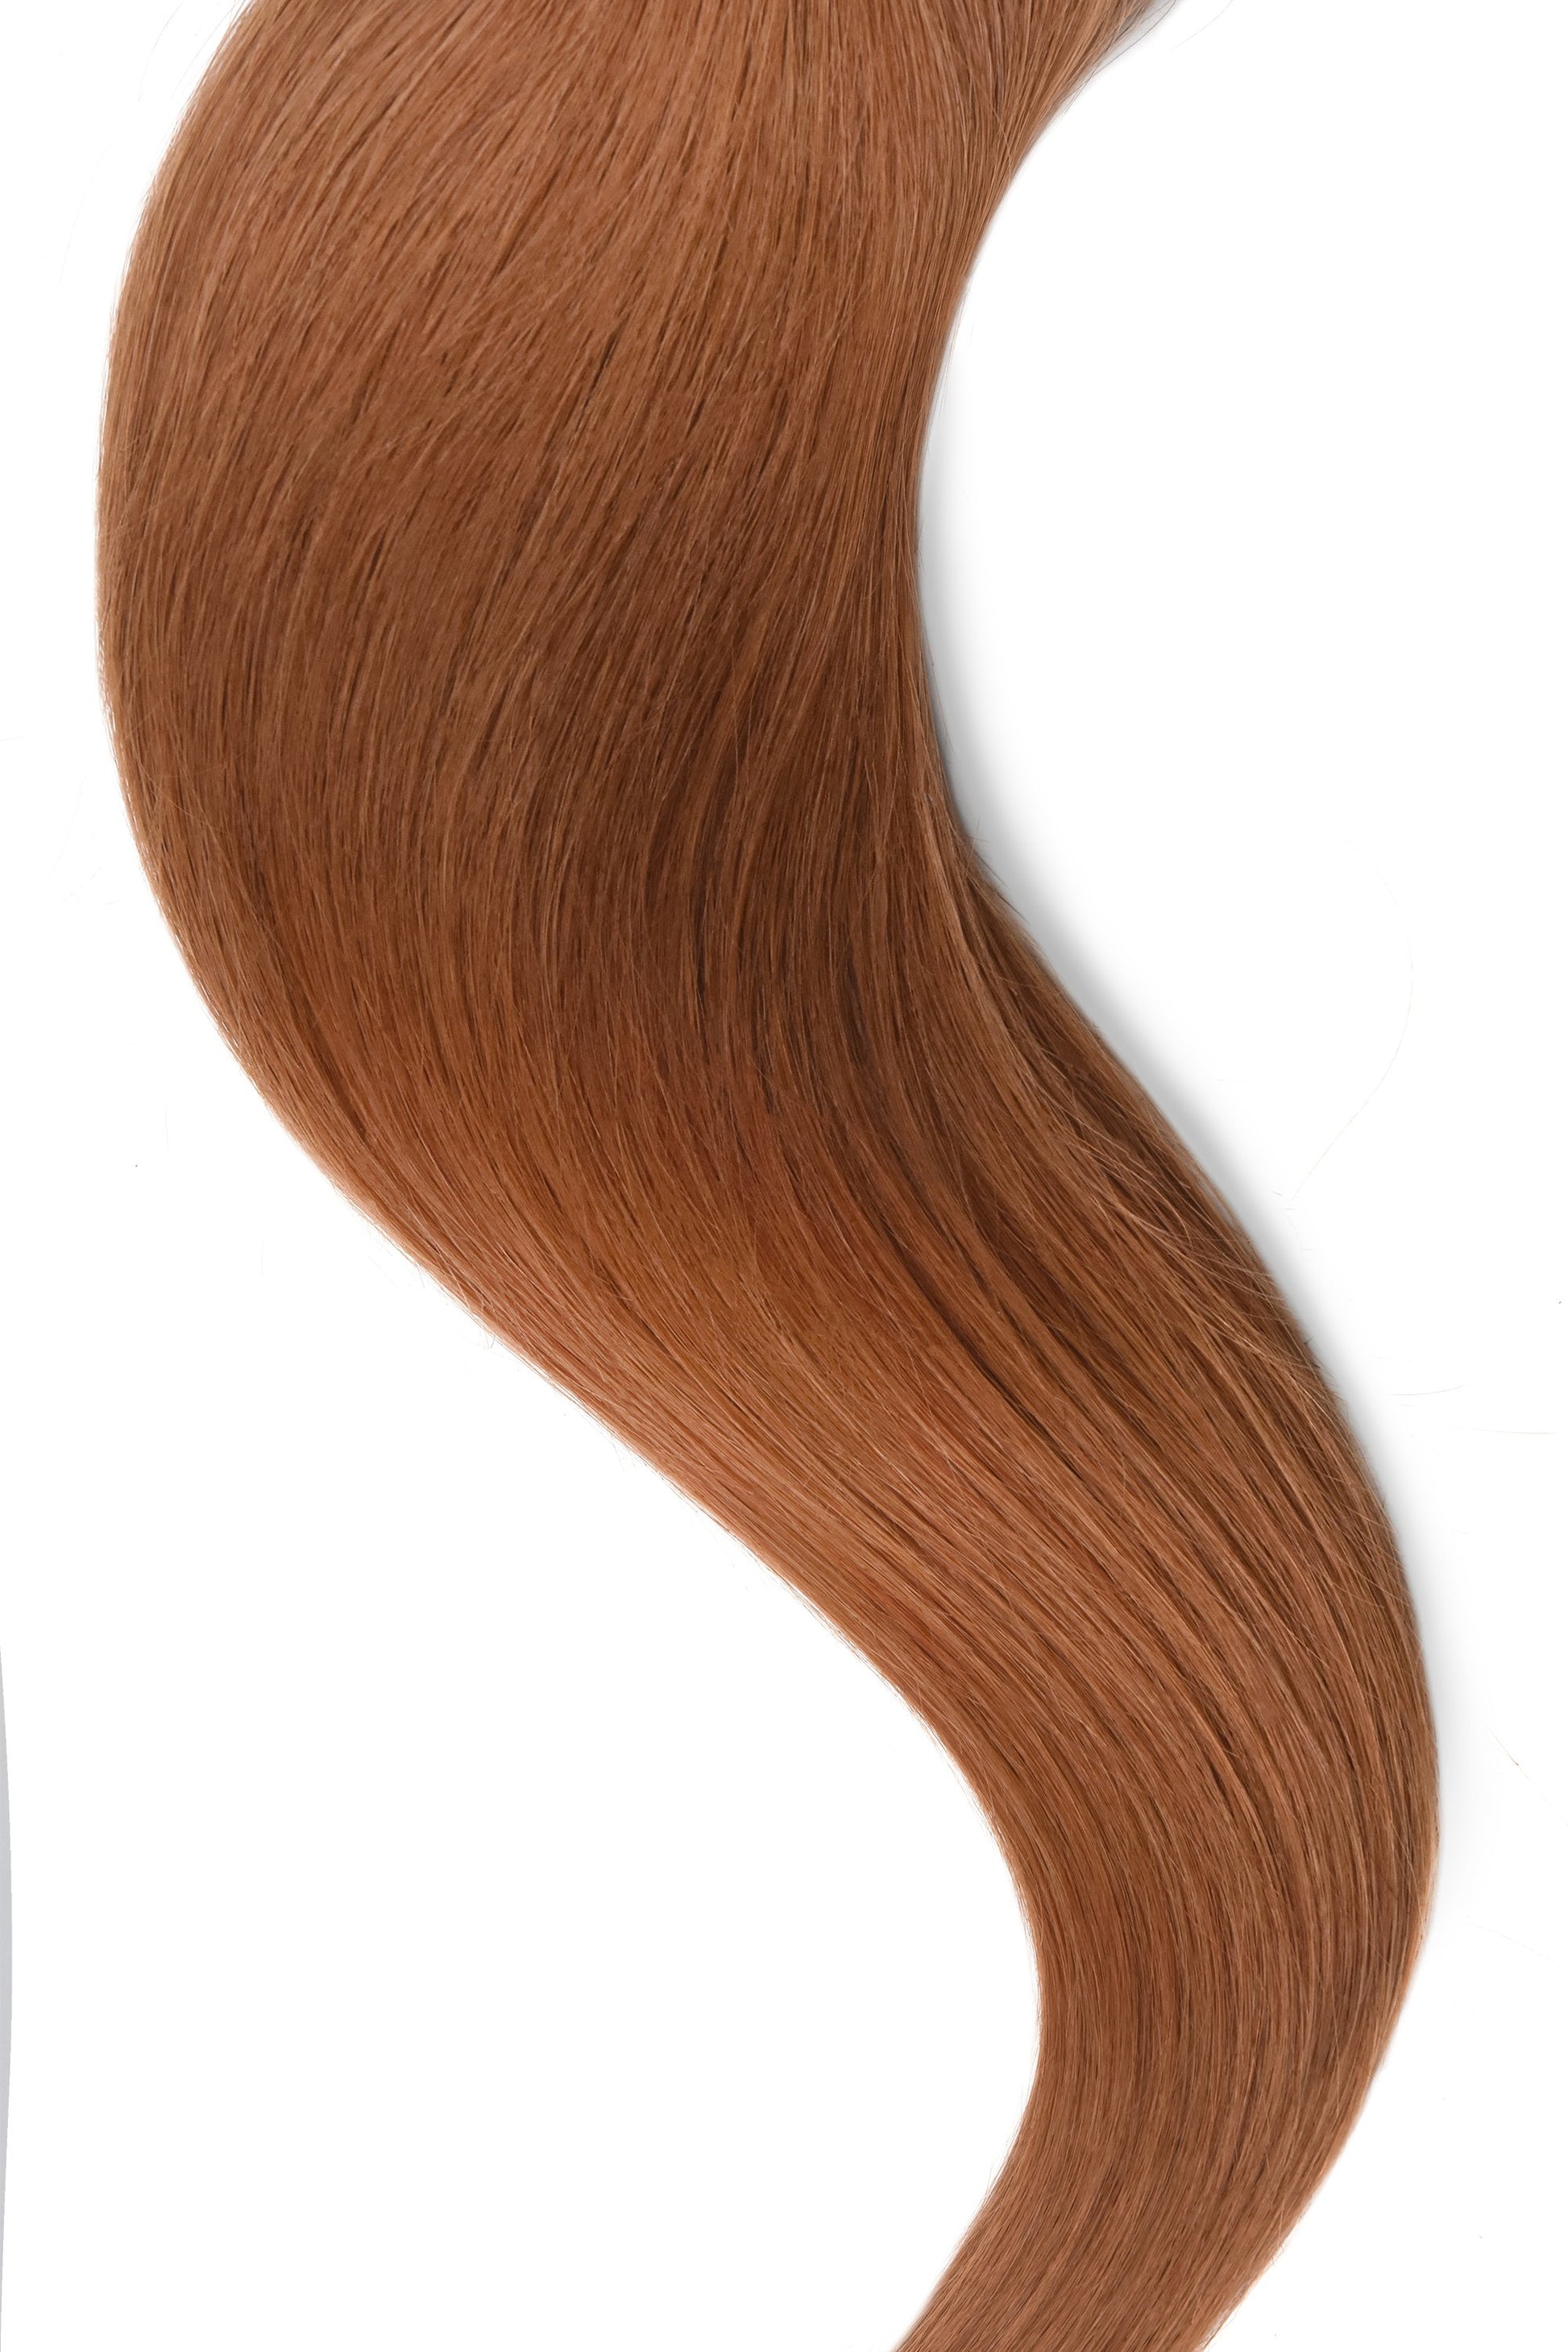 tape hair extensions made from 100% remy human hair. 1-2 Free shipping in USA. 